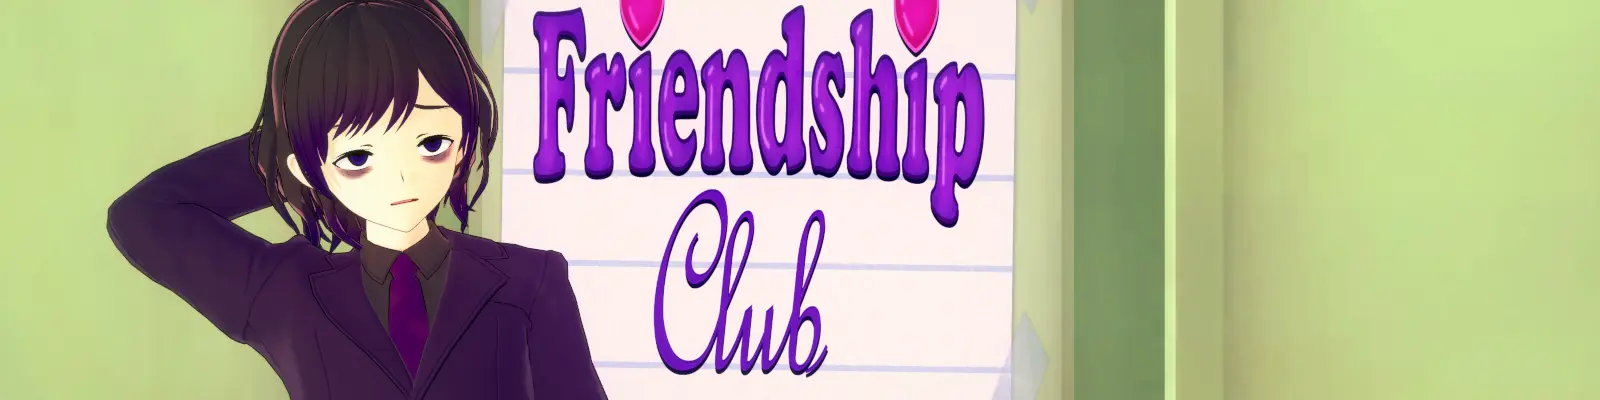 Welcome to The Friendship Club! main image